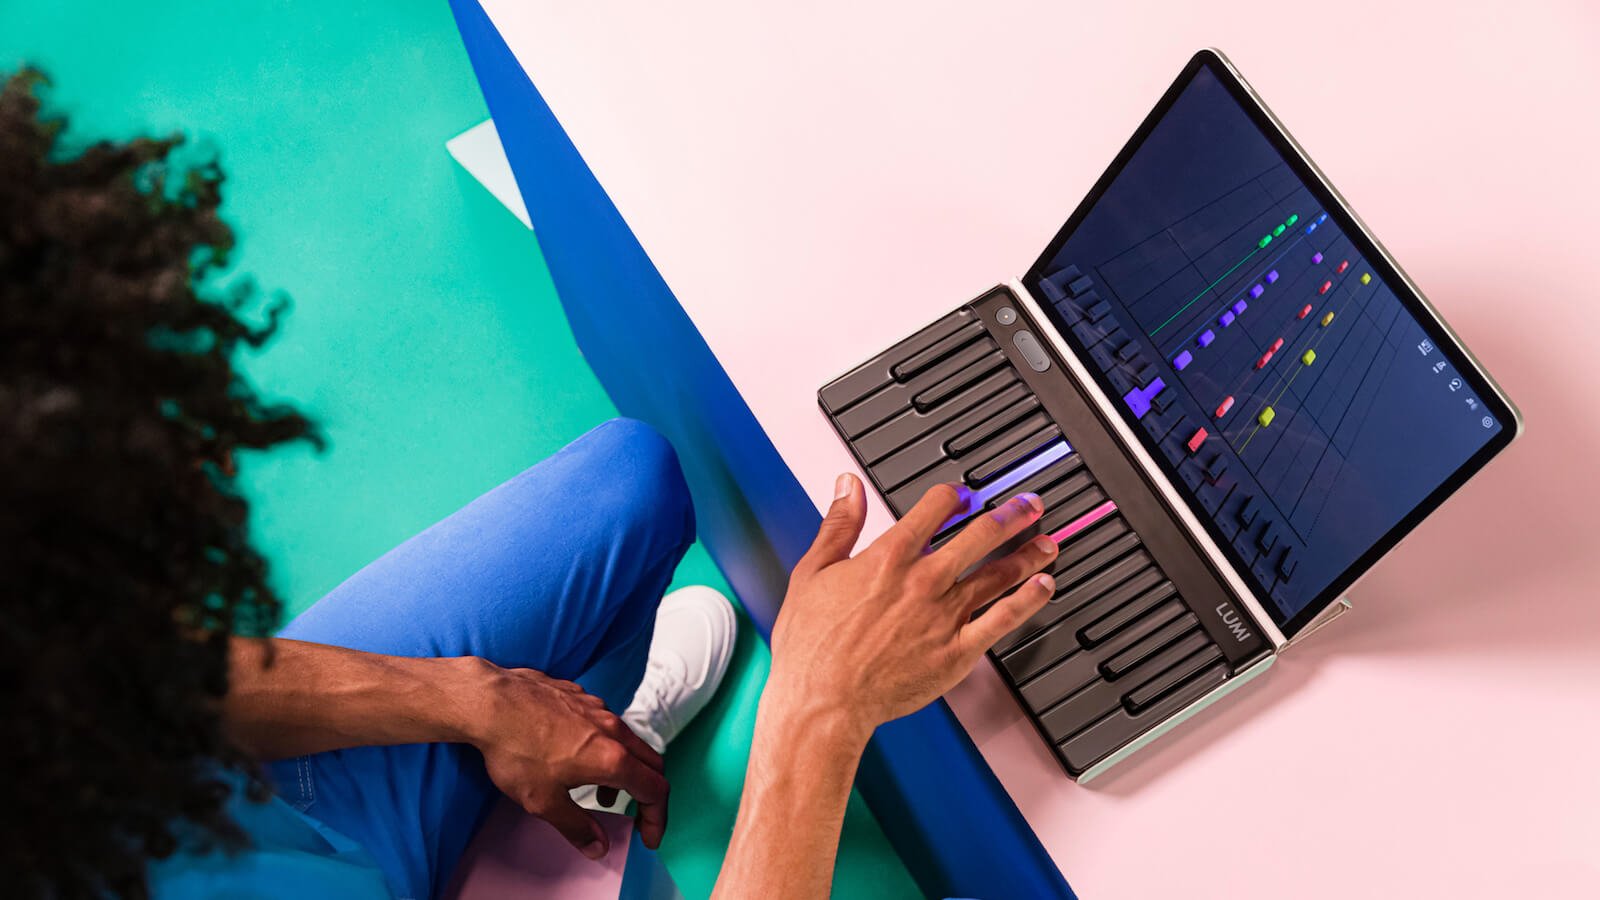 ROLI LUMI Keys portable beginner’s keyboard features lights to guide you as you play songs